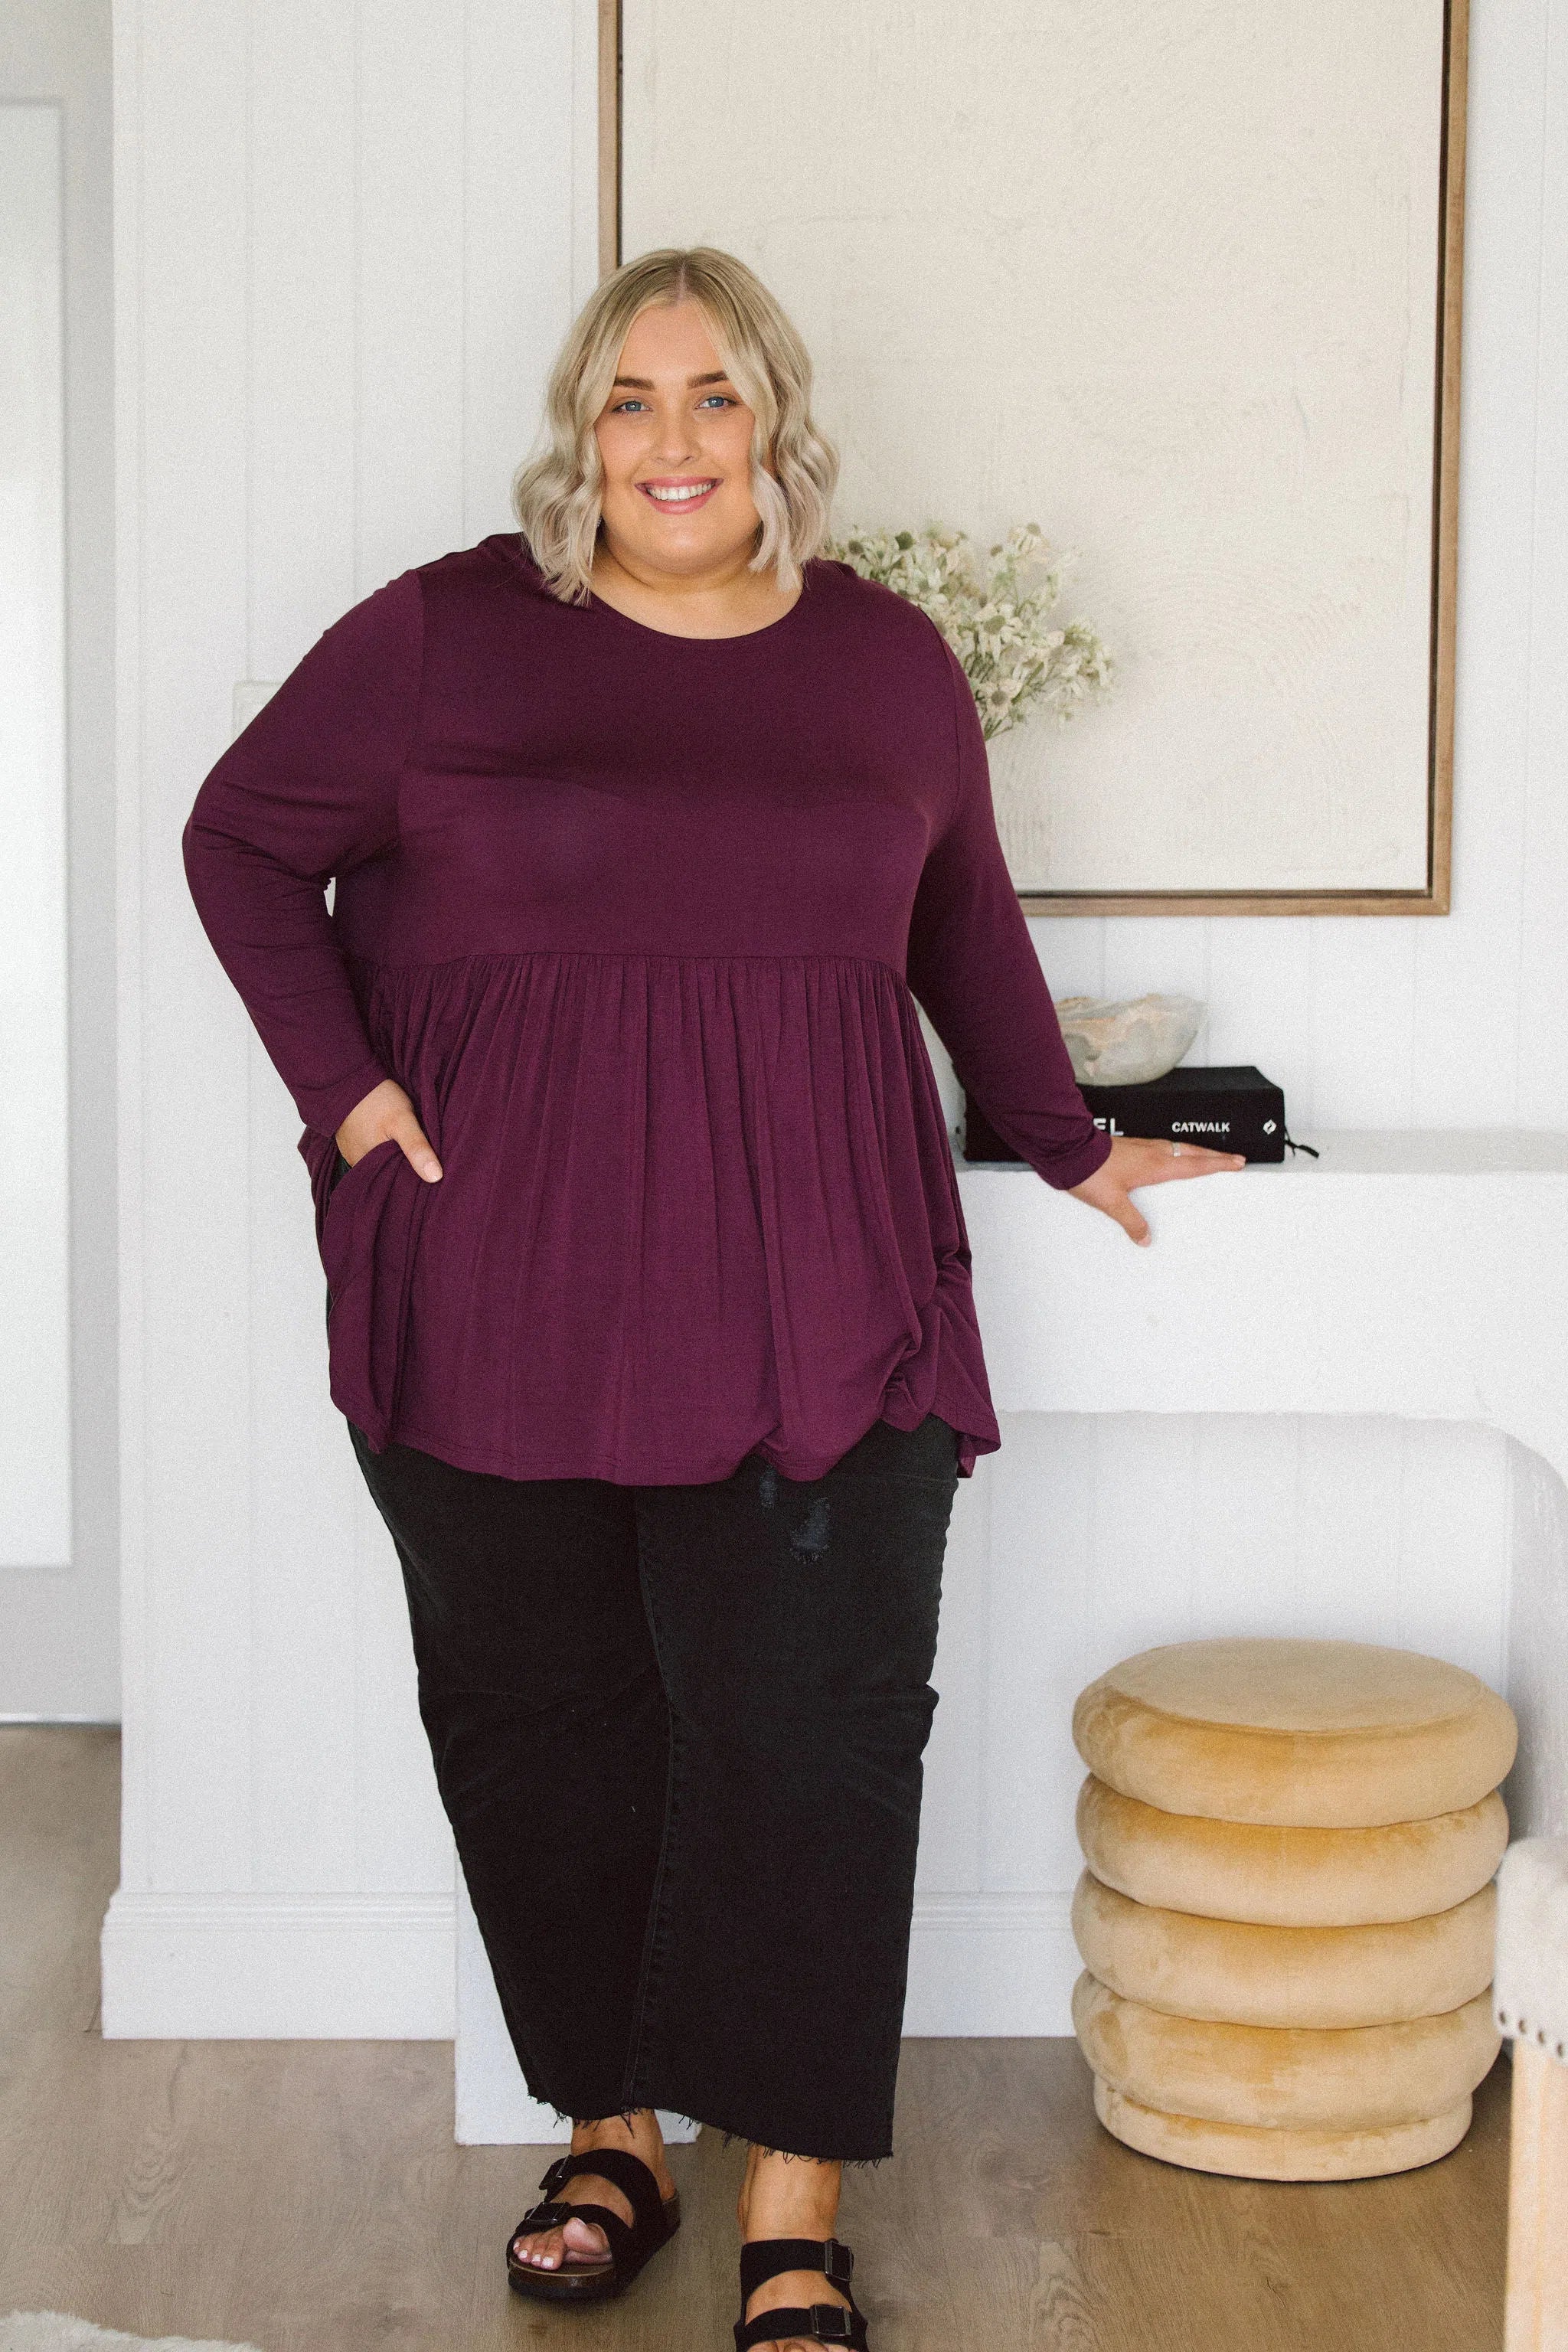 Plus Size clothing,  women modeling a Curvy Womens Tops, Lucy Long Sleeve Top in Purple berry